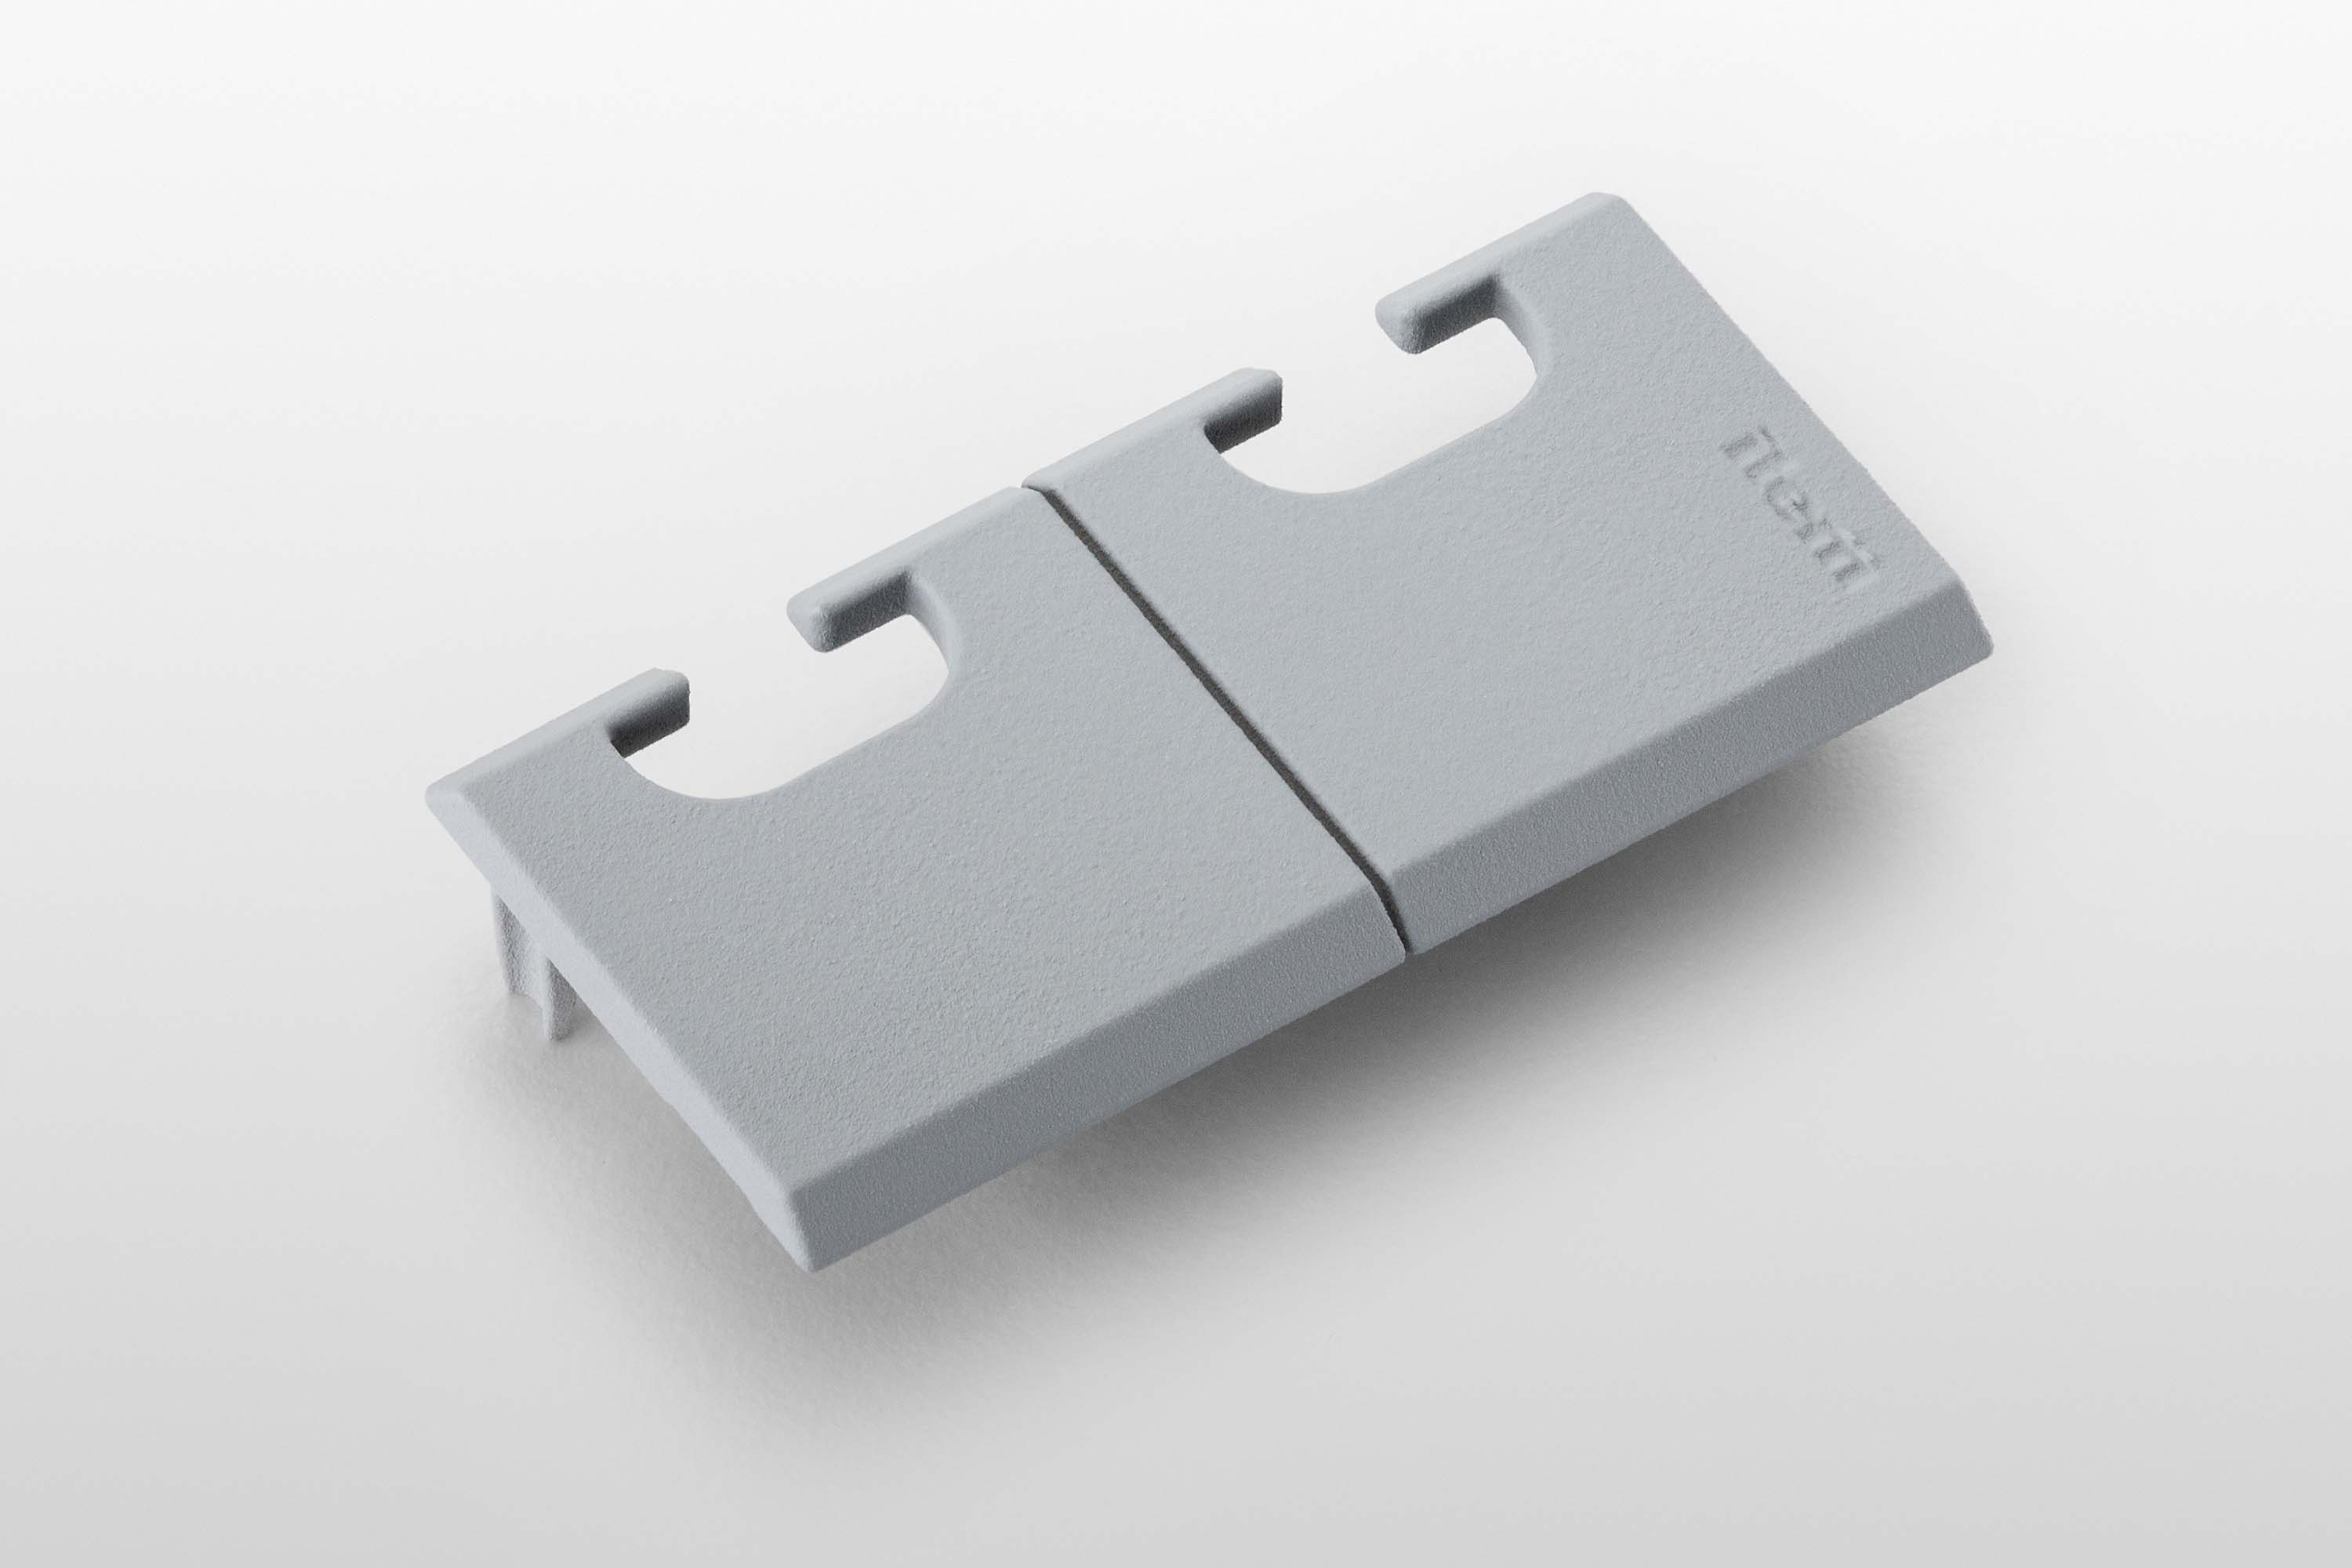 Cap, Groove Plate X 8 80x40, grey similar to RAL 7042